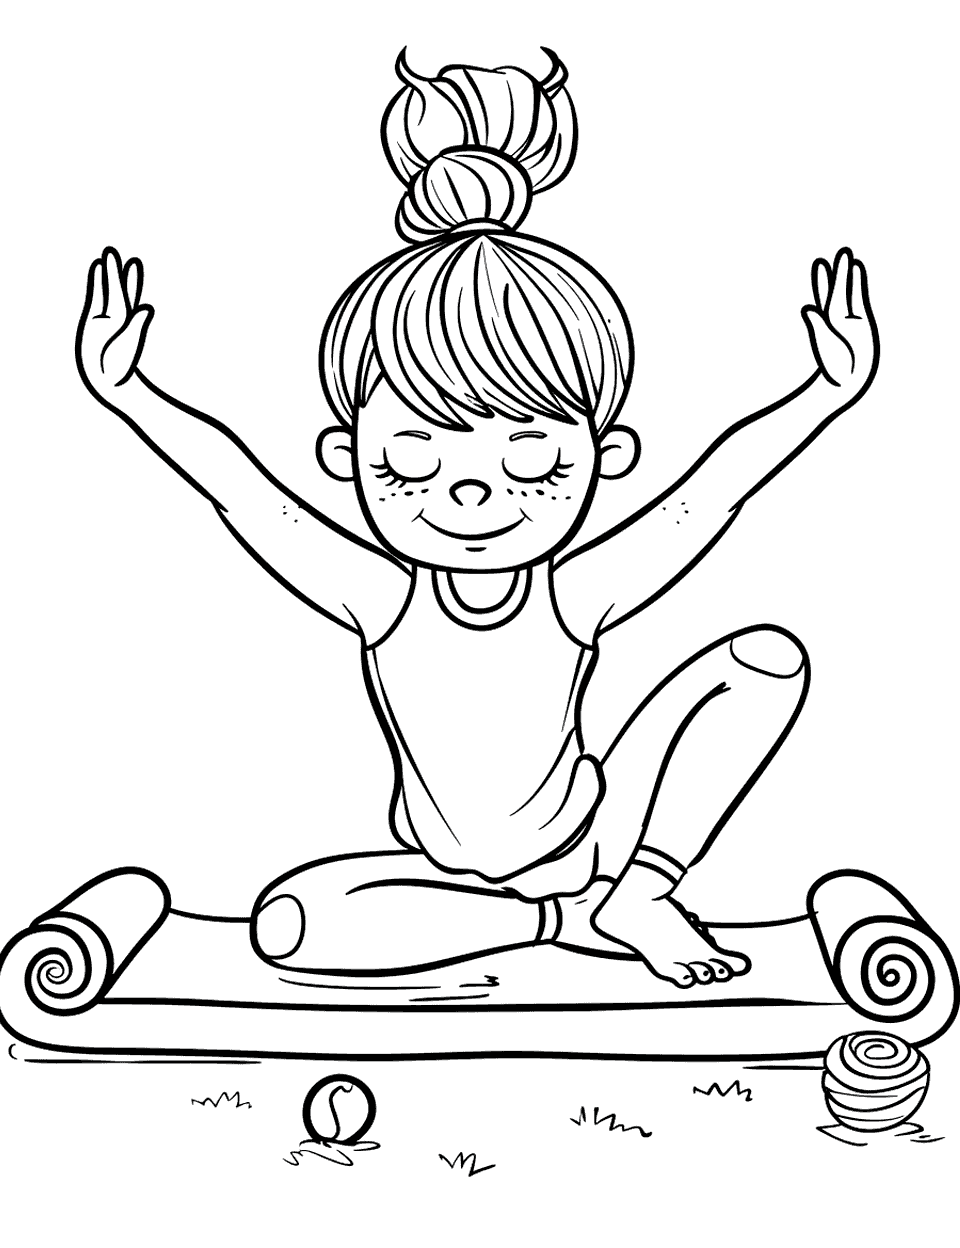 Yoga Pose Sports Coloring Page - A person in a yoga pose on a simple mat.